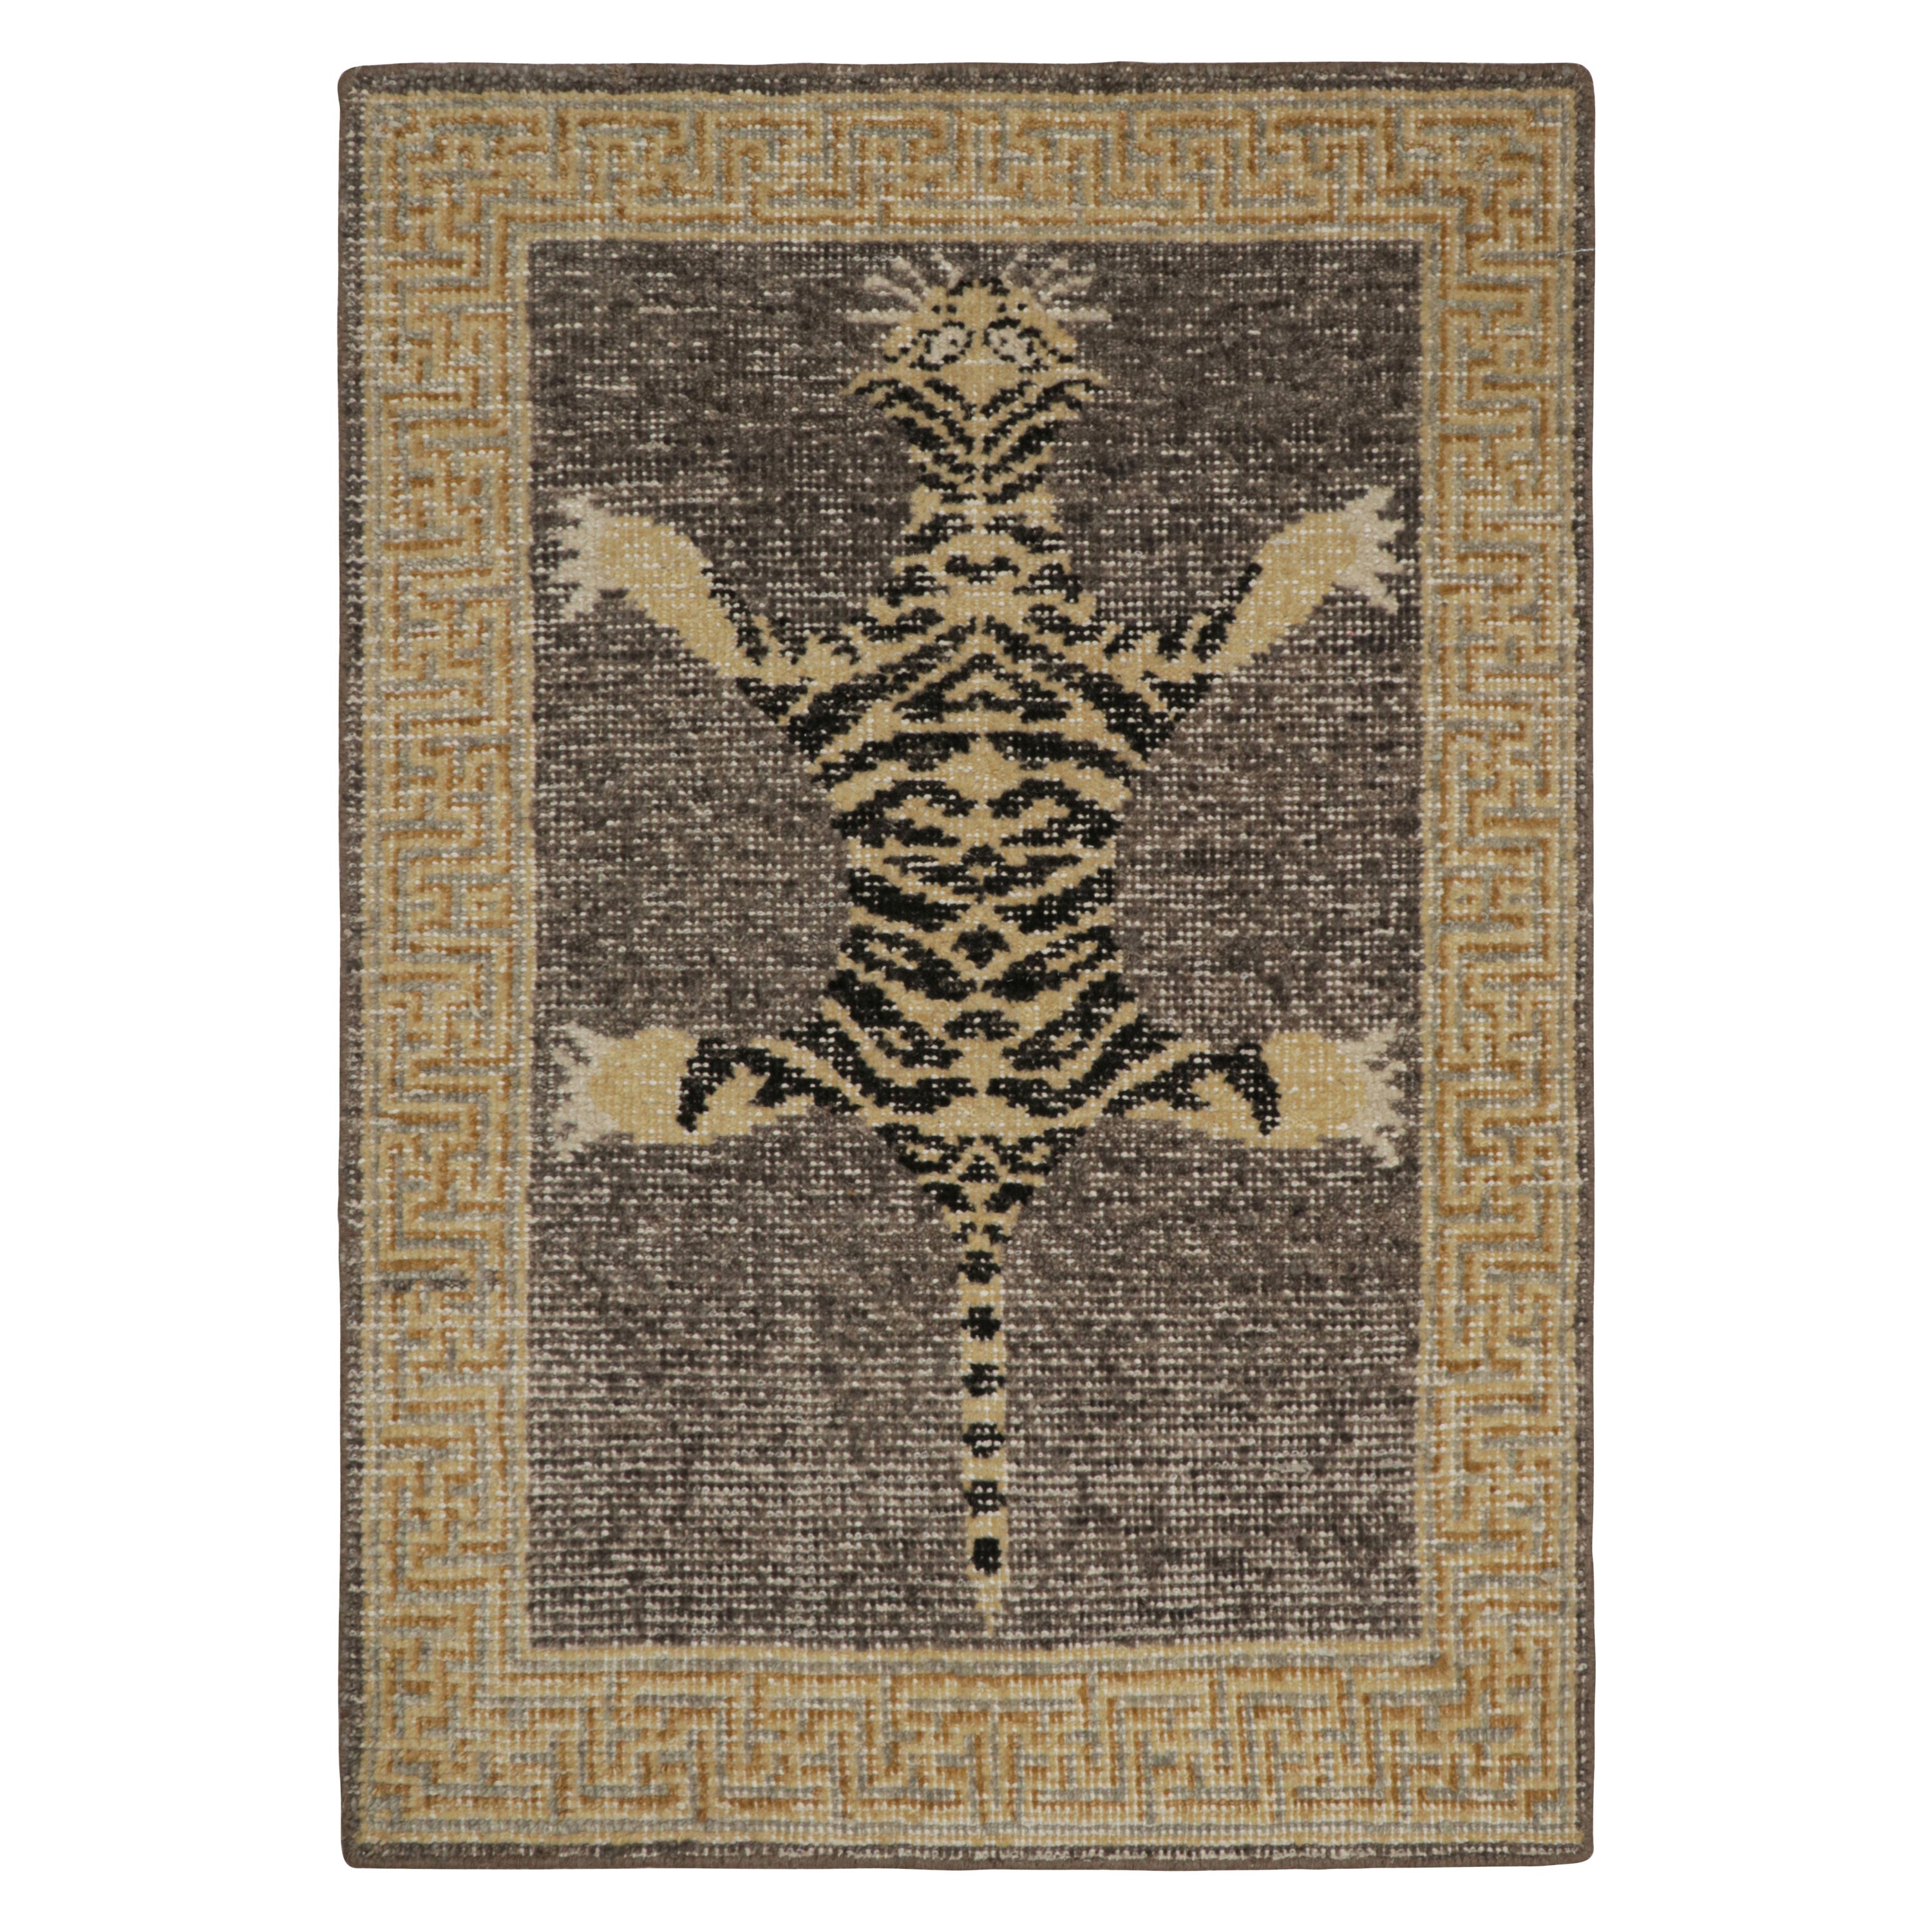 Rug & Kilim’s Modern Tiger Skin Accent Pictorial Rug in Gray, Beige and Black For Sale